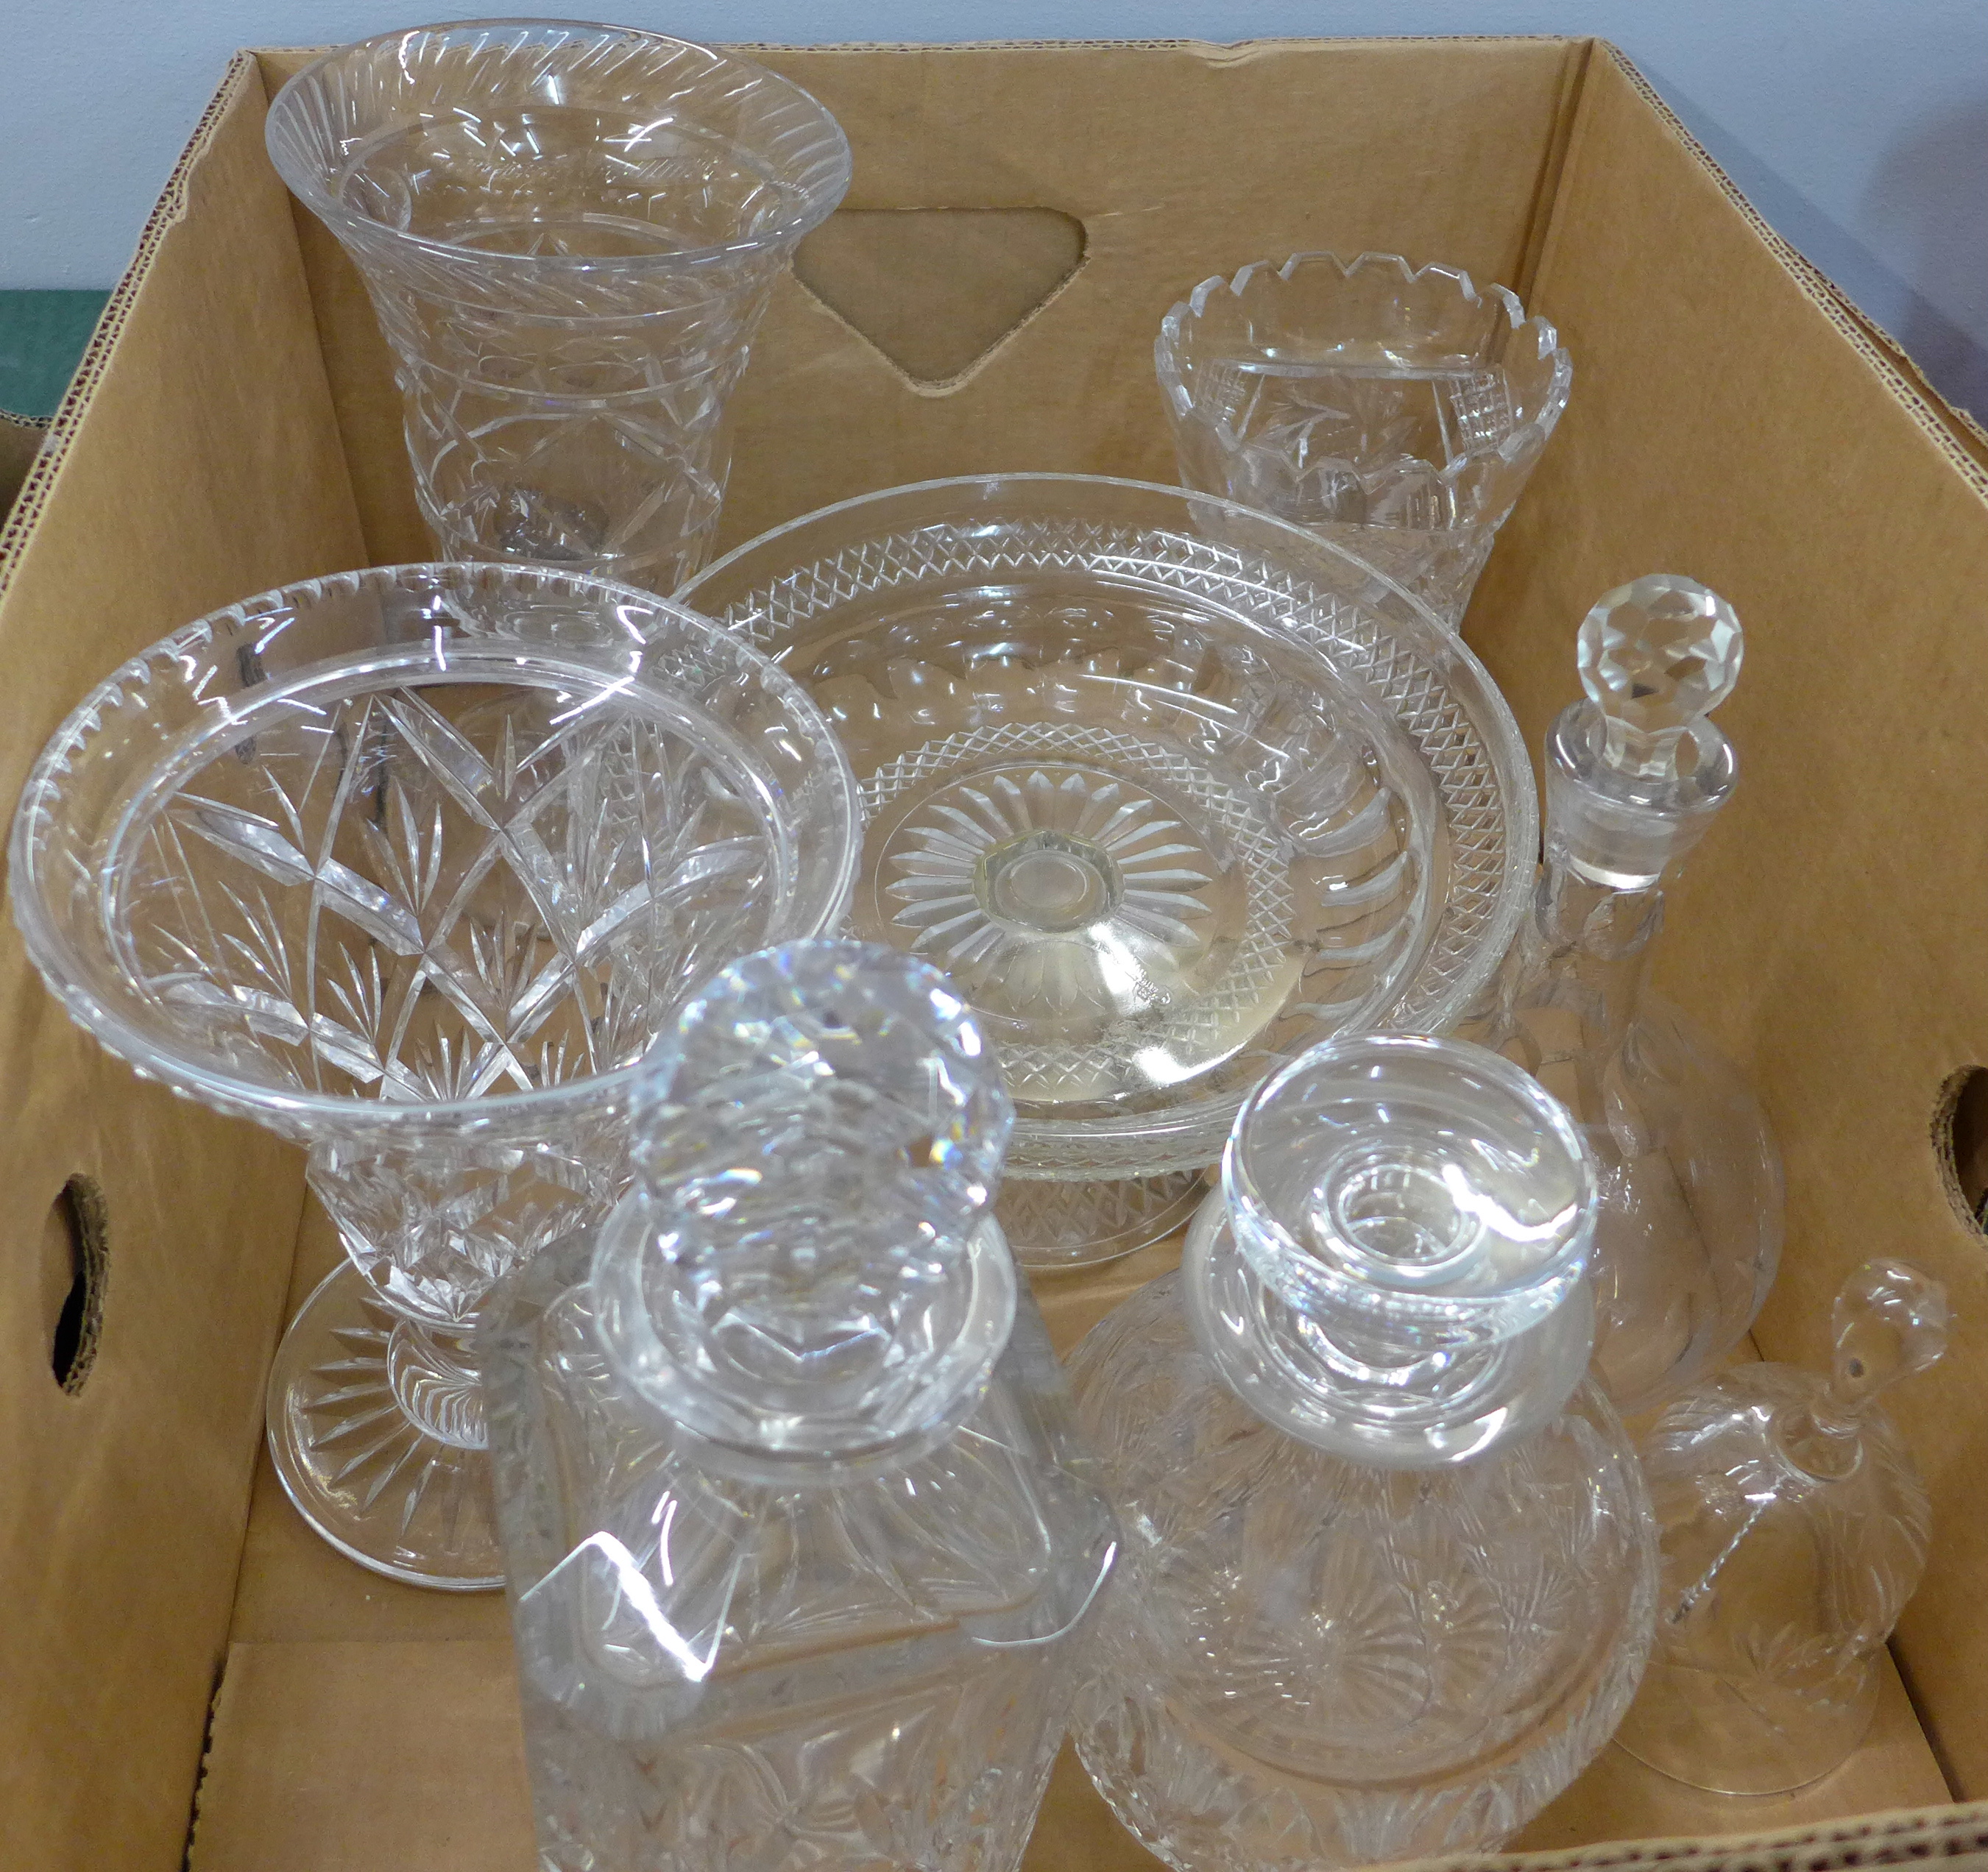 A collection of lead crystal and cut glass, including two decanters, vases, etc.